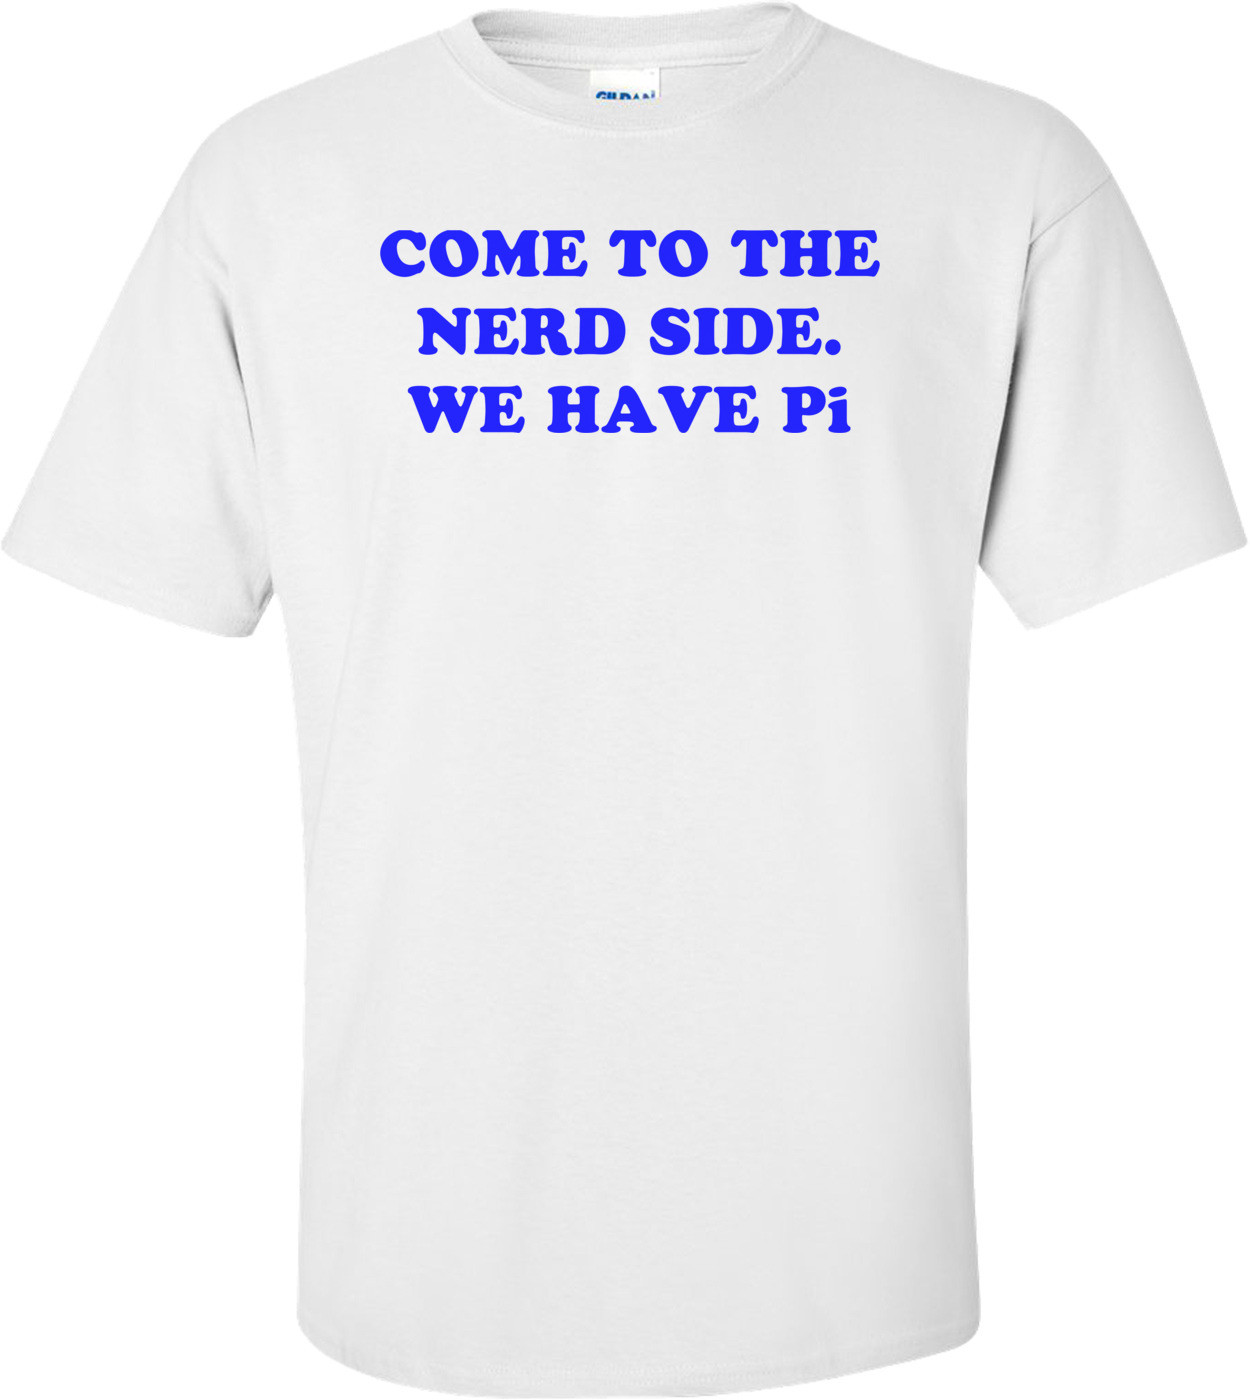 COME TO THE NERD SIDE. WE HAVE Pi Shirt